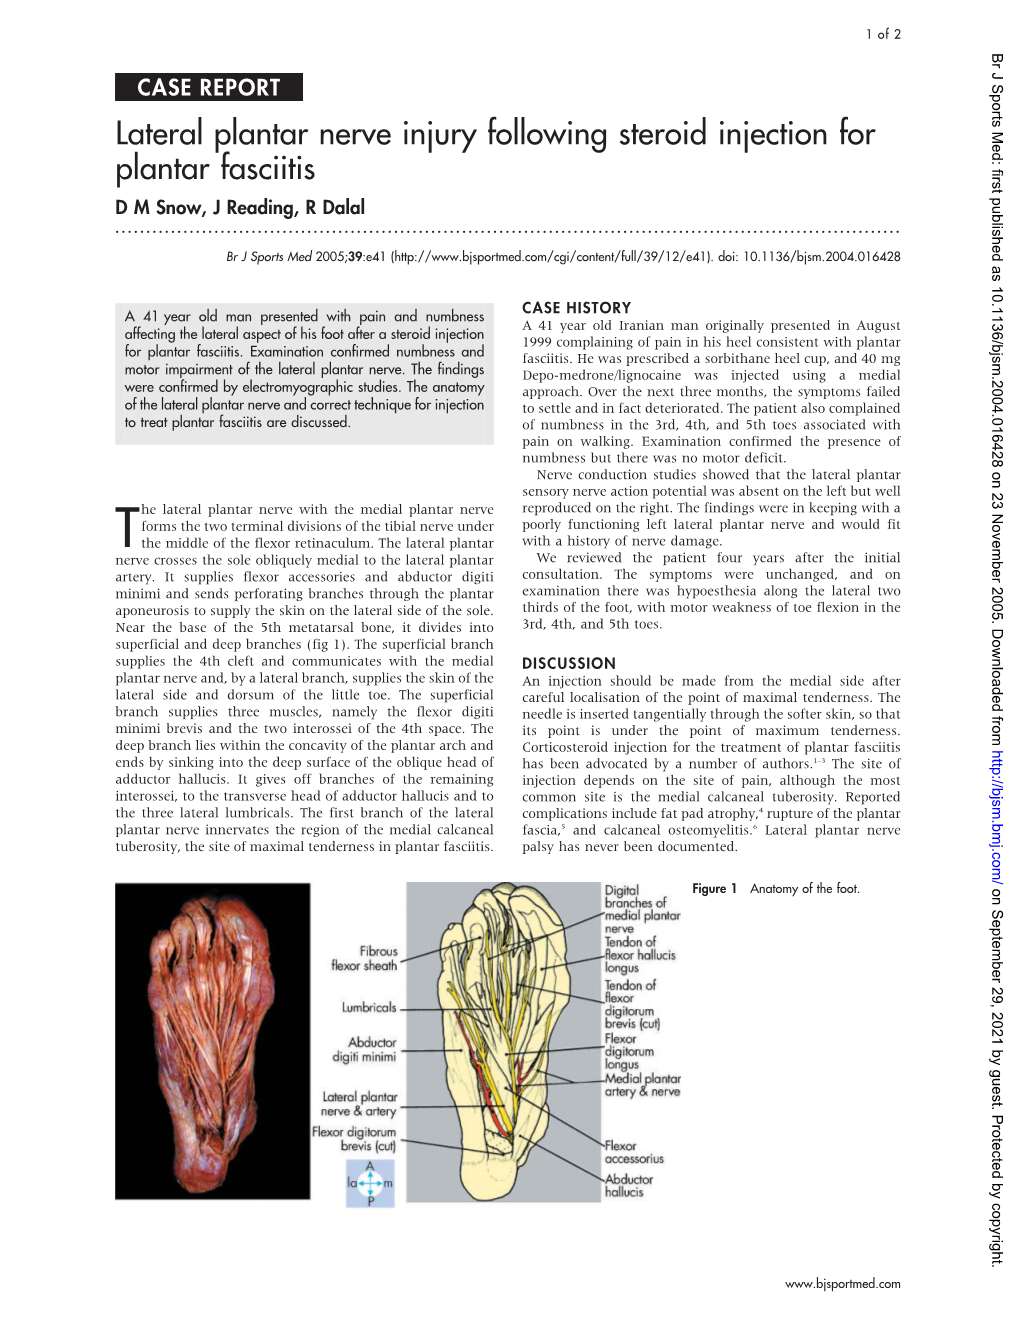 Lateral Plantar Nerve Injury Following Steroid Injection for Plantar Fasciitis D M Snow, J Reading, R Dalal